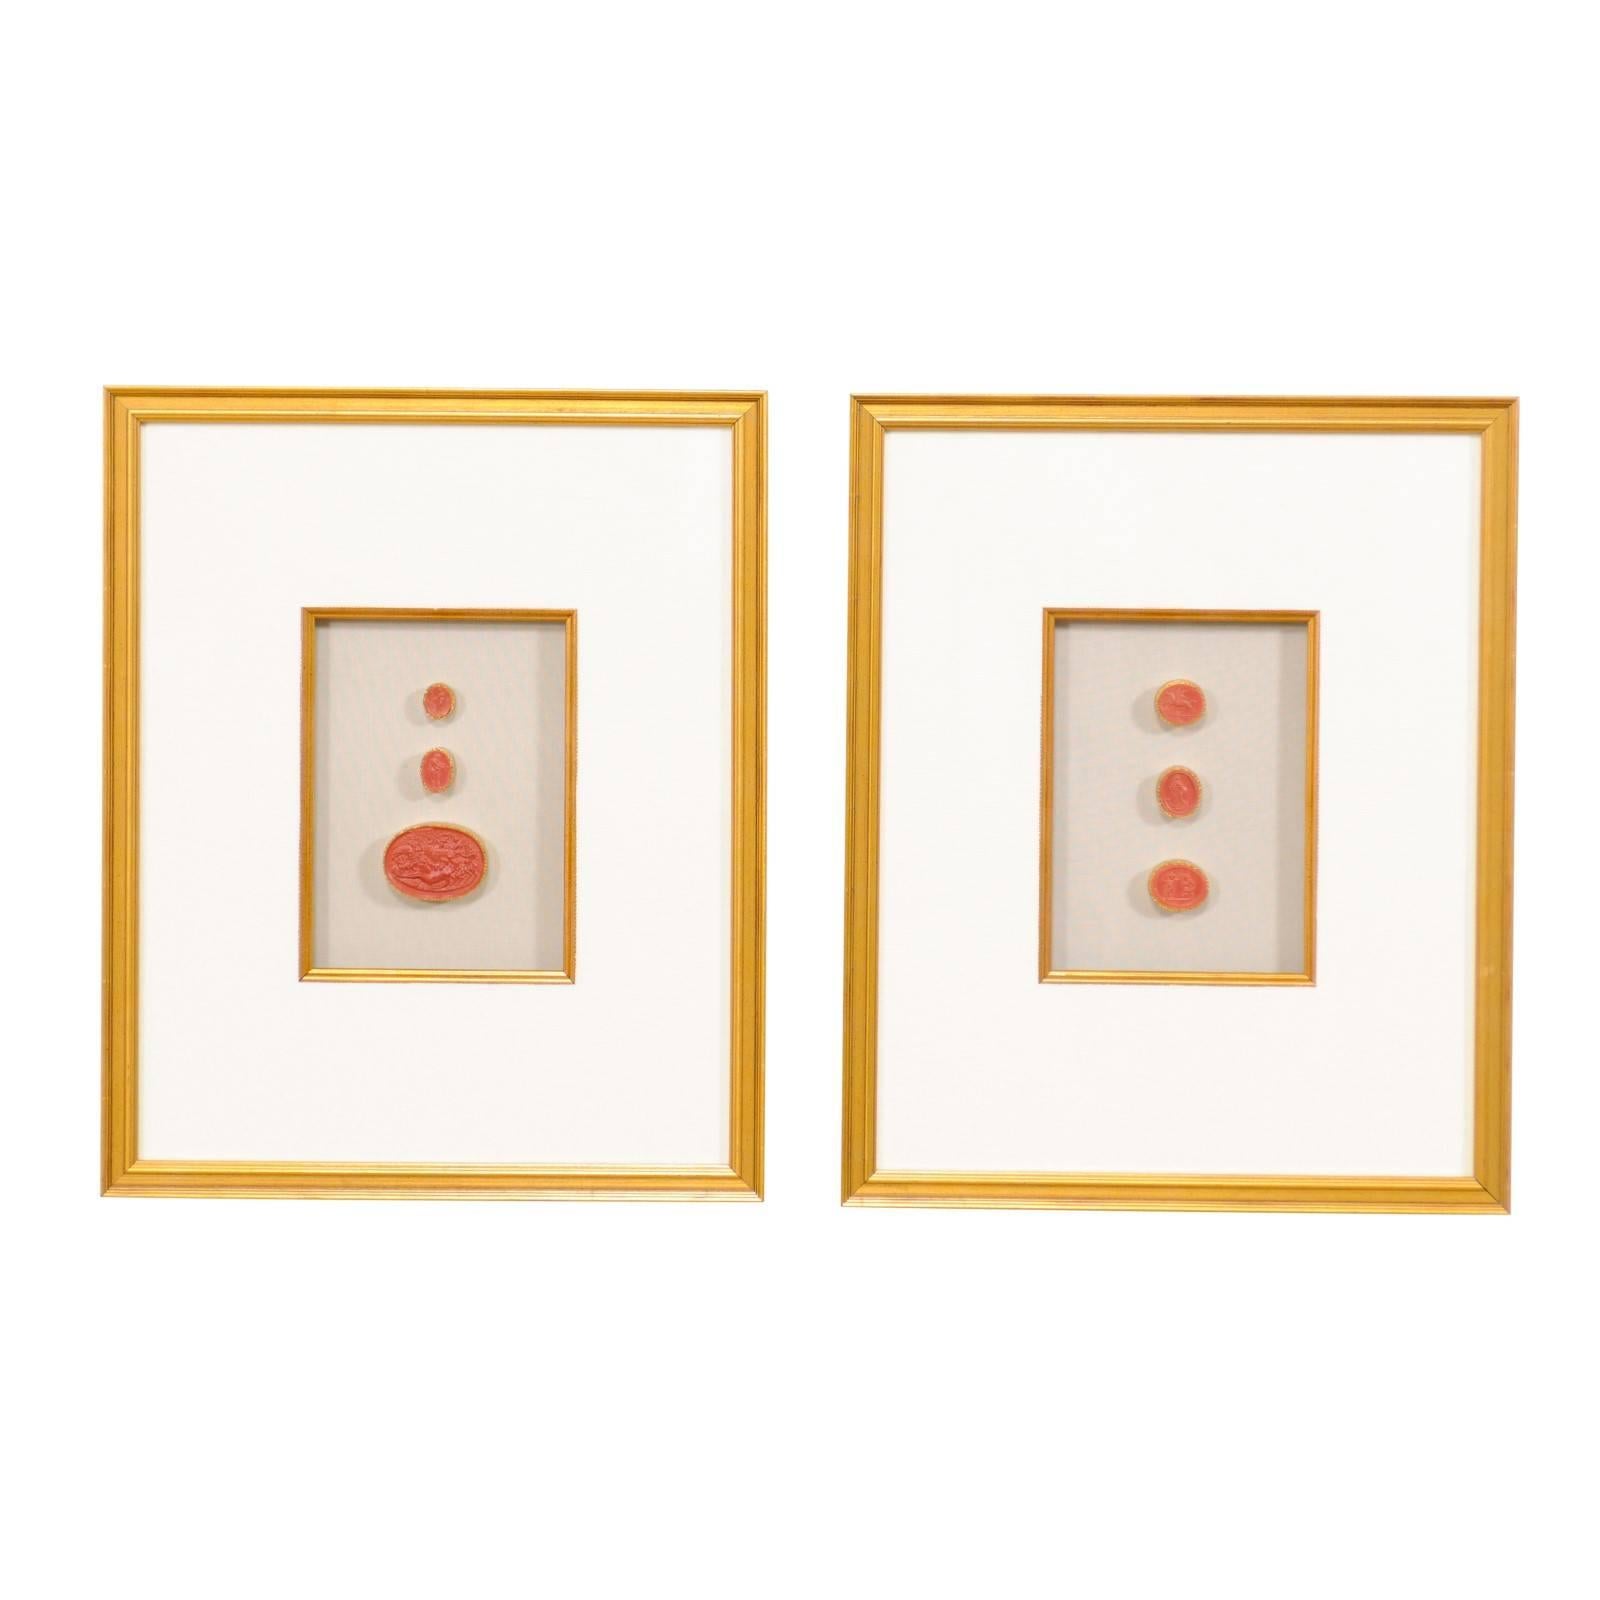 Rare Italian Red Intaglios Mounted in a Pair of Painted Gold Frames